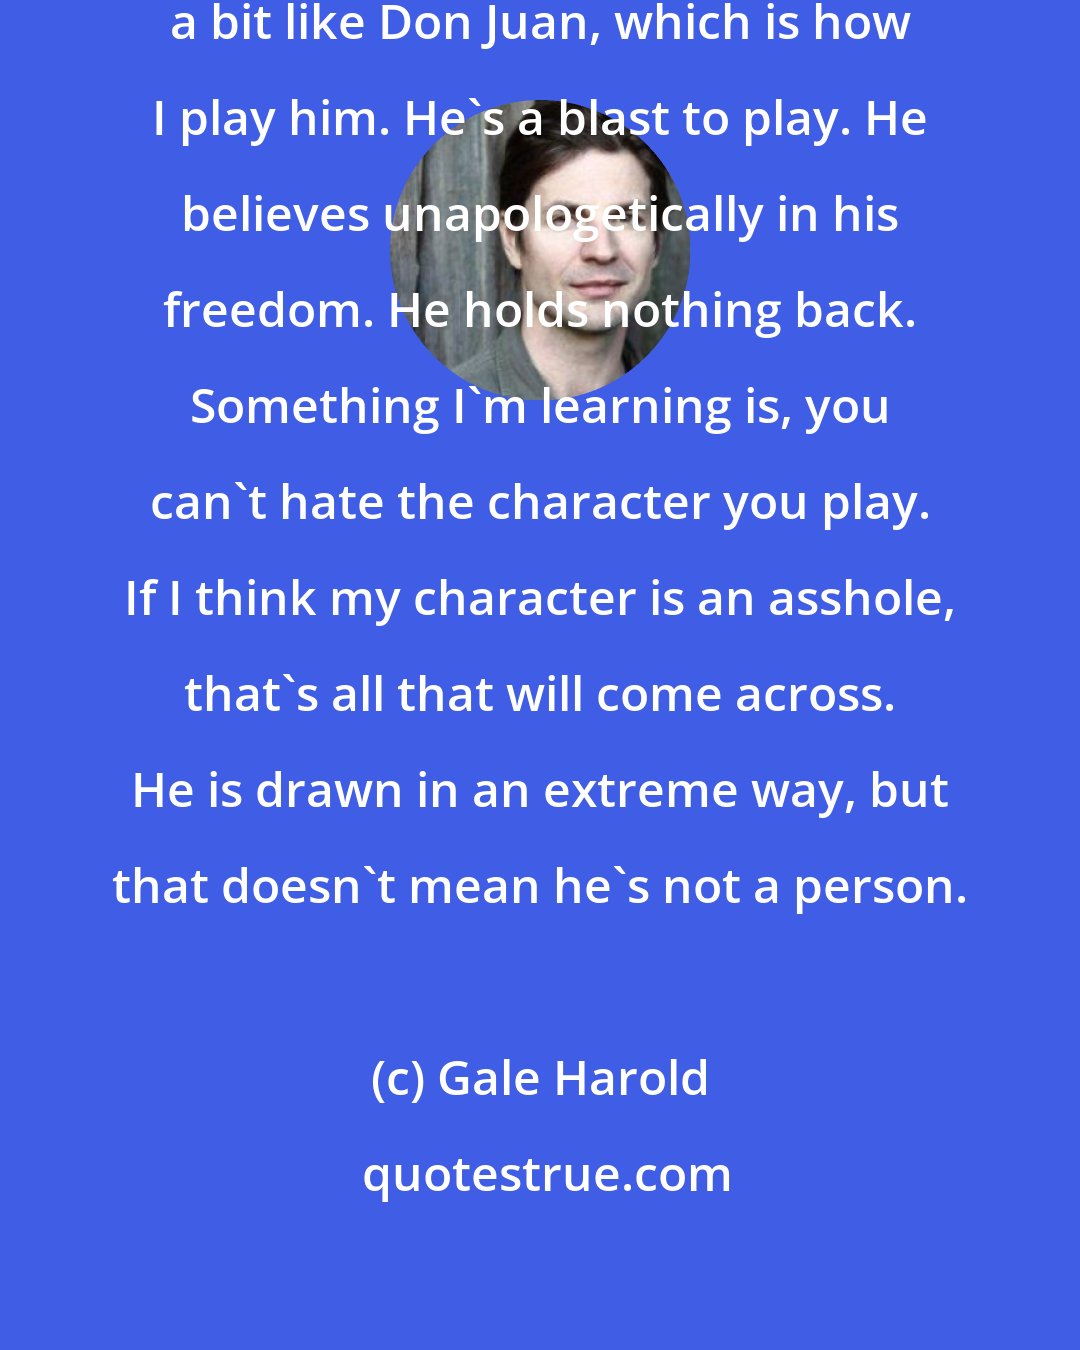 Gale Harold: Brian is an archetypal character, a bit like Don Juan, which is how I play him. He's a blast to play. He believes unapologetically in his freedom. He holds nothing back. Something I'm learning is, you can't hate the character you play. If I think my character is an asshole, that's all that will come across. He is drawn in an extreme way, but that doesn't mean he's not a person.